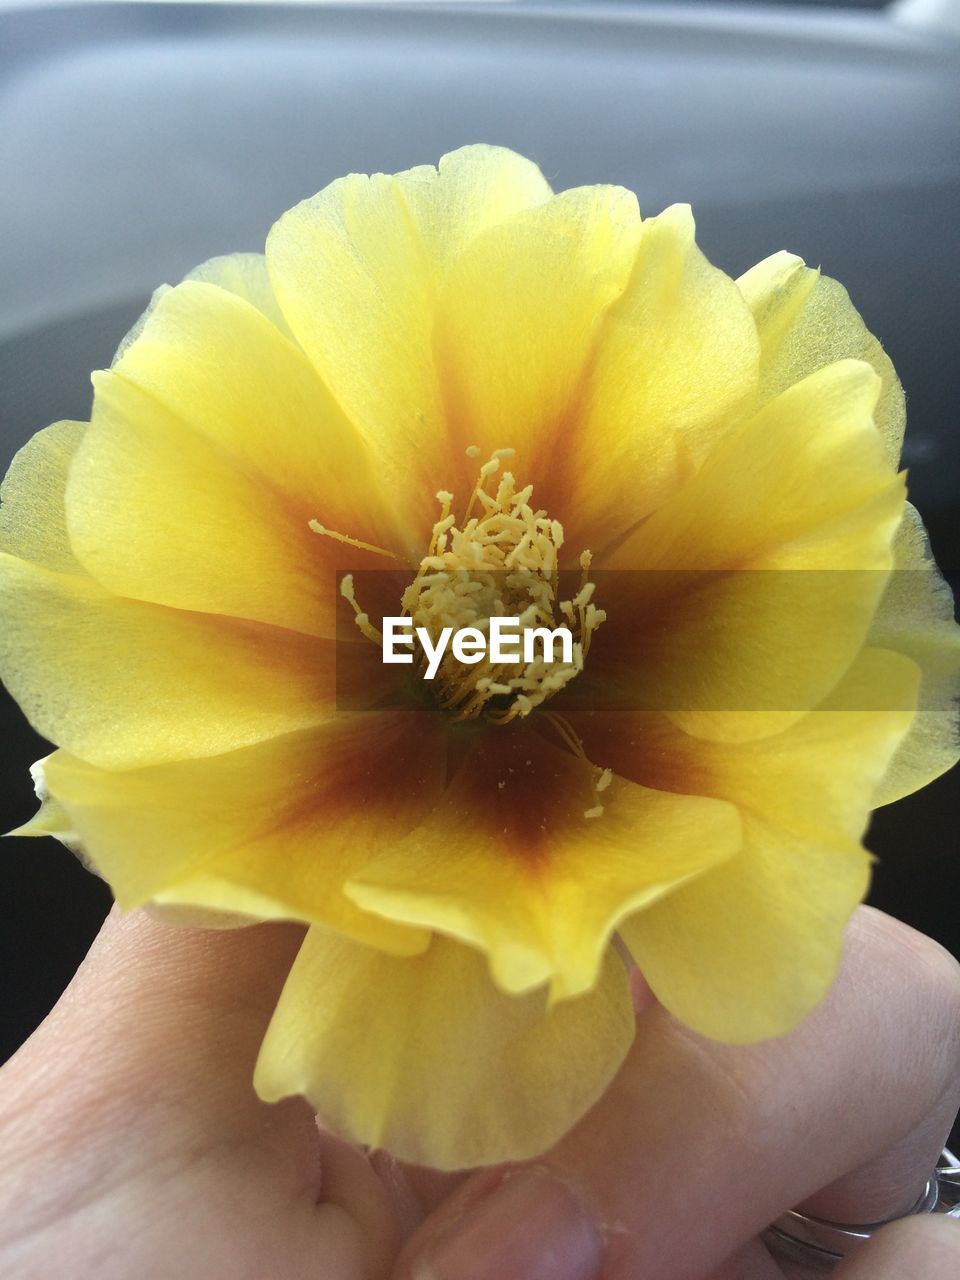 Cropped image of person holding cactus flower